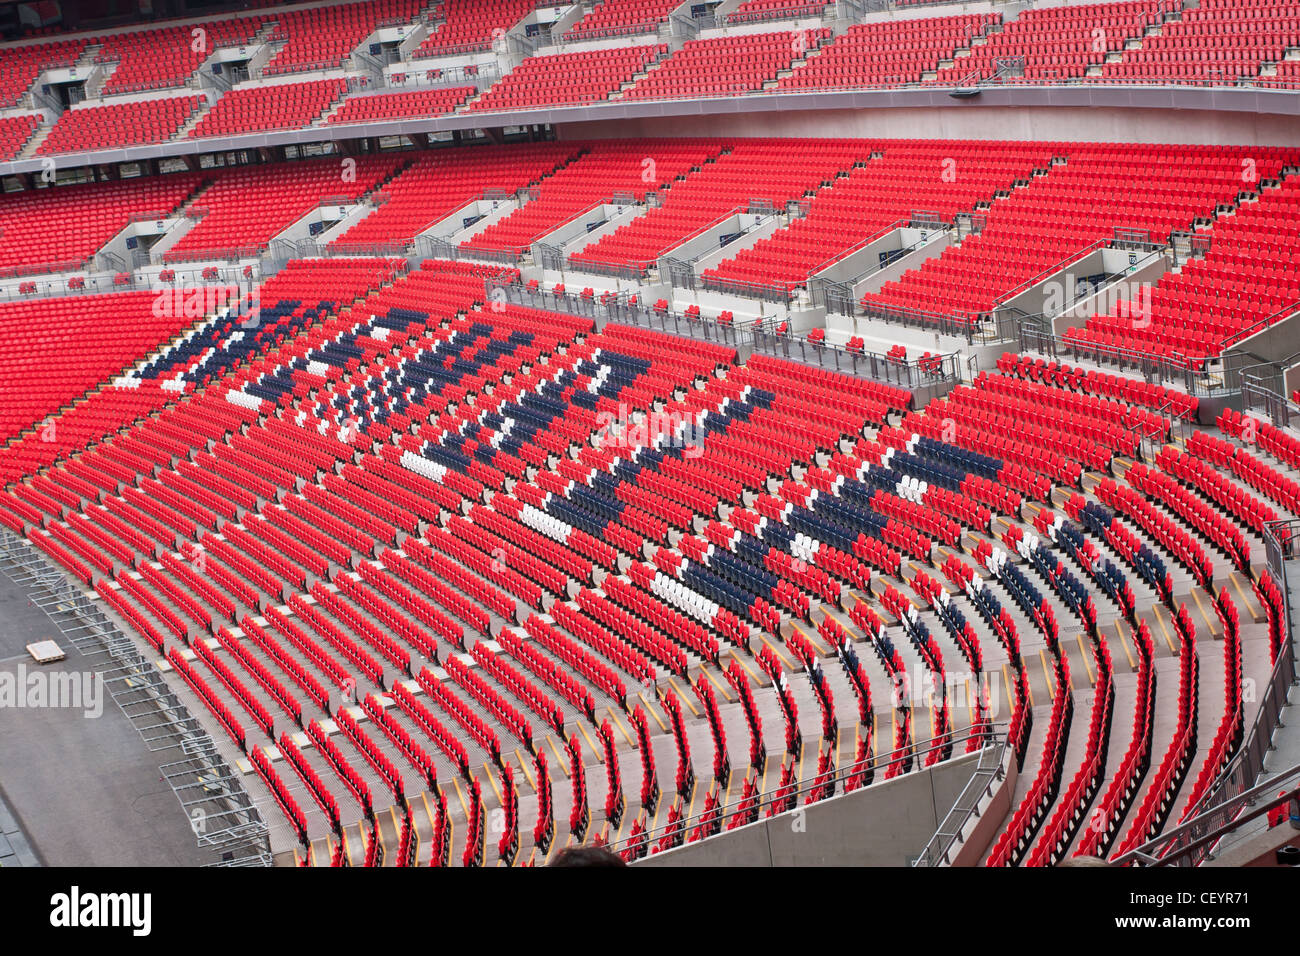 Internal shot of the new Wembley Stadium. 2012 London Olympic Venue and home of the England national football team. Stock Photo